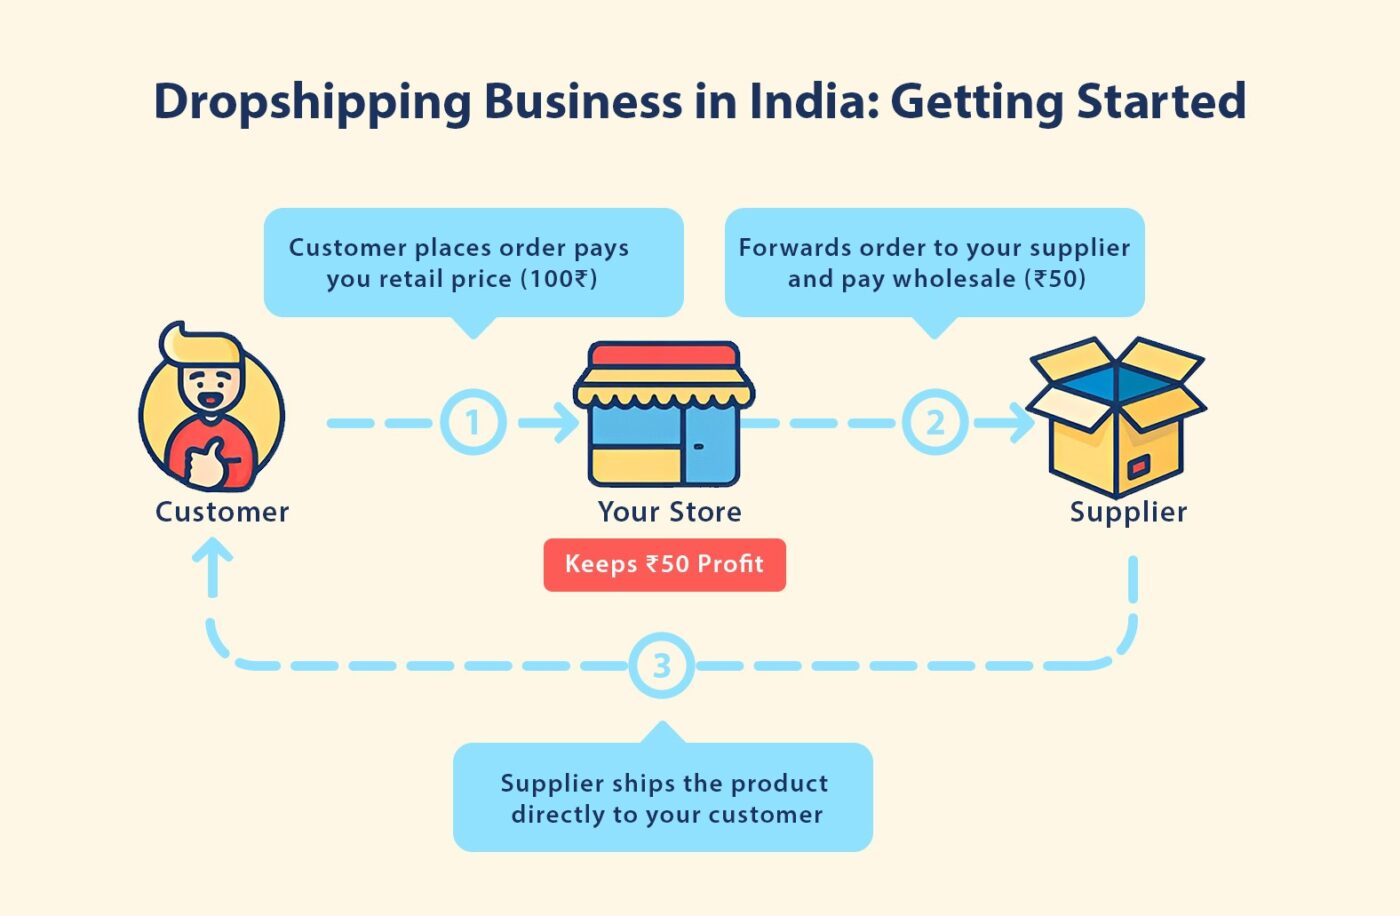 Dropshipping Business in India: Getting Started